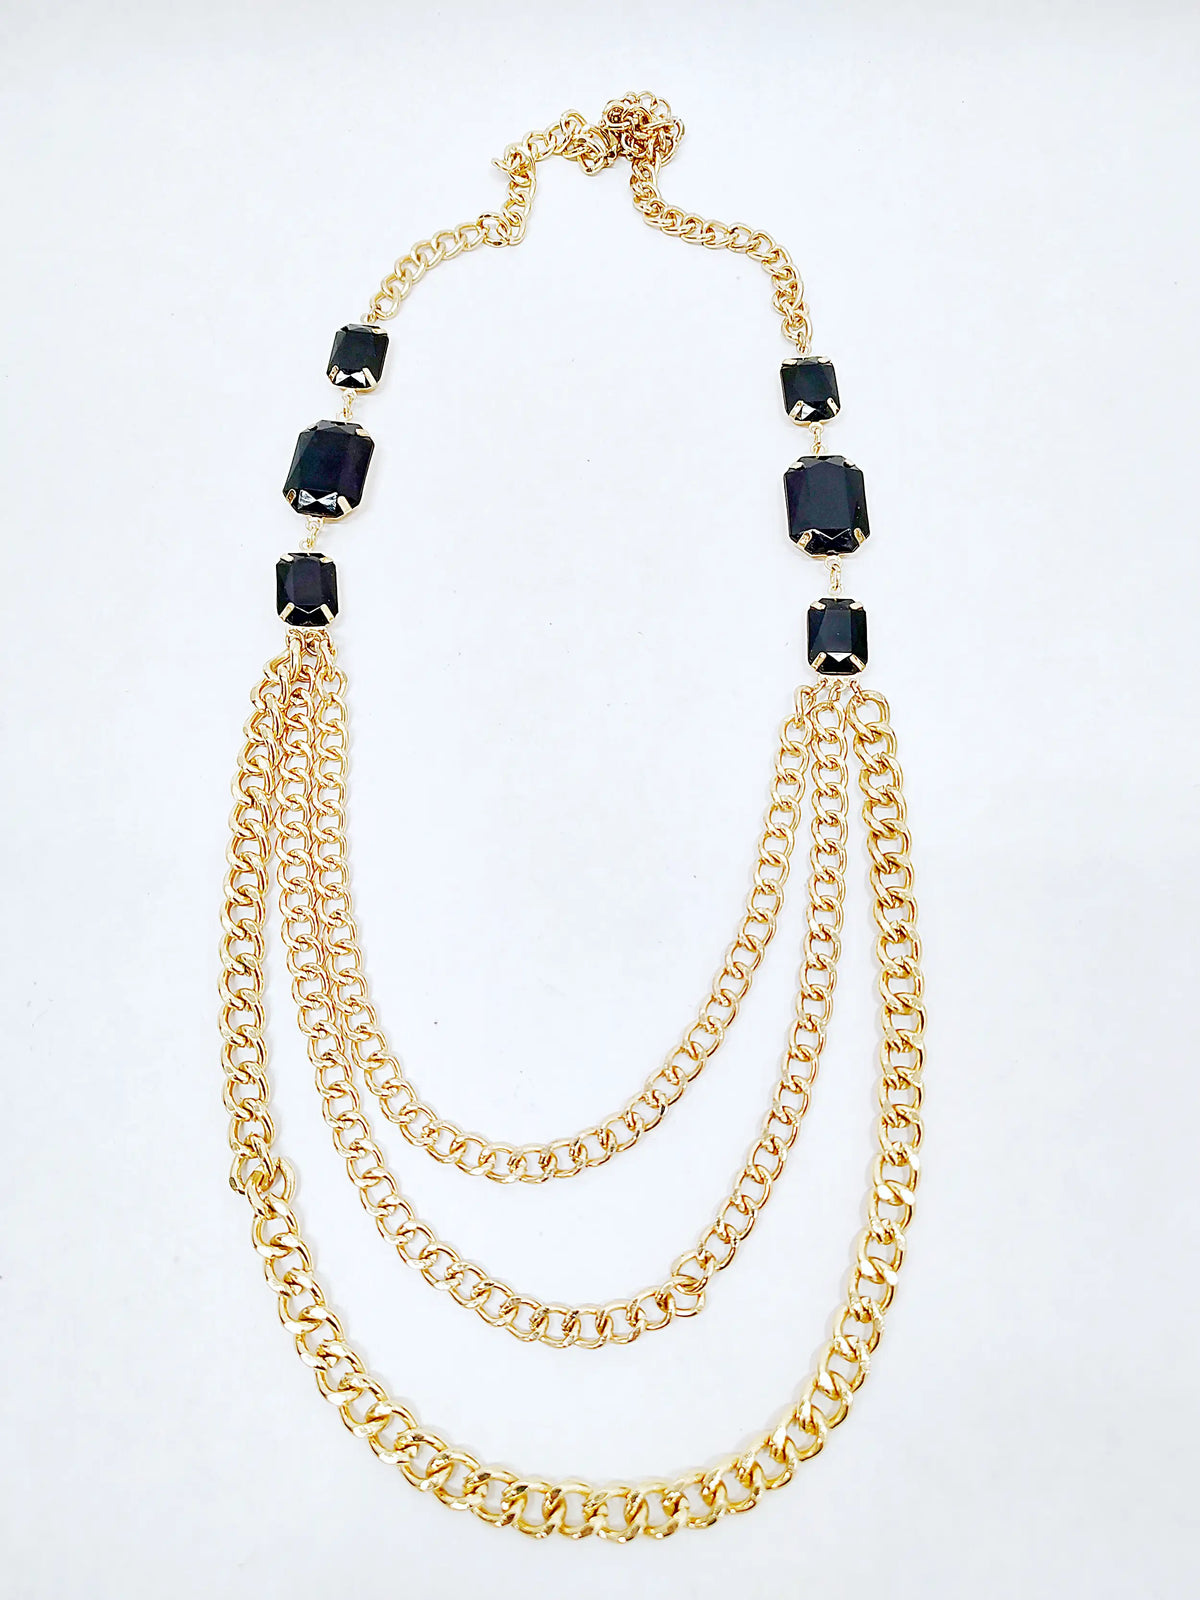 Vintage 32" Triple Strand Gold Tone Chain Link Black Bead Necklace - Hers and His Treasures